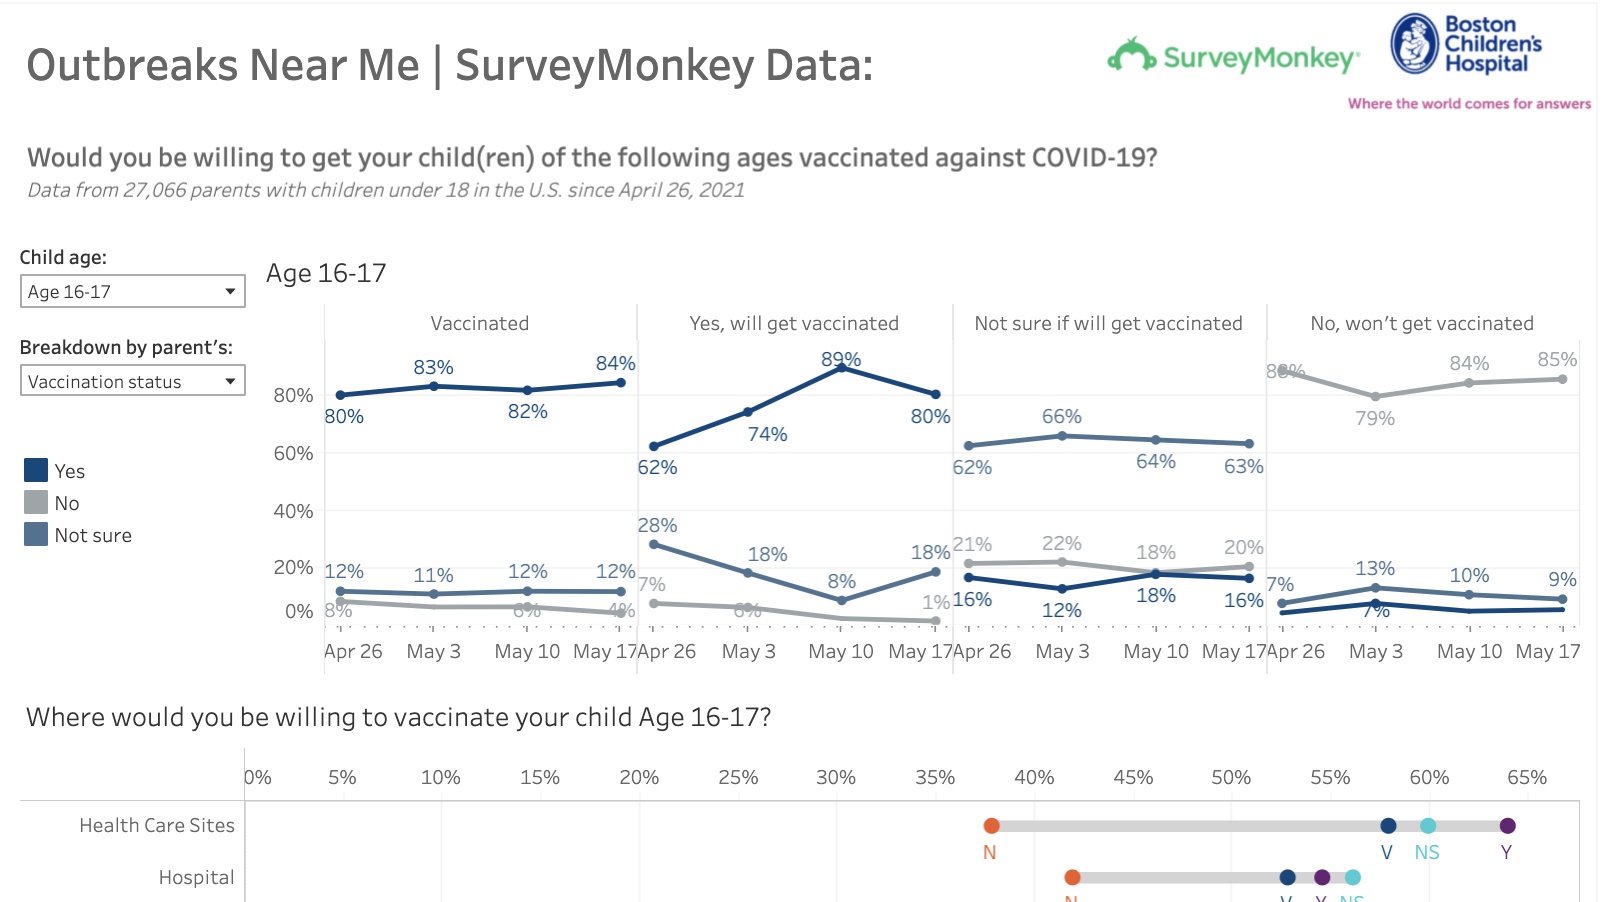 Dashboard of poll data on parents' willingness to vaccinate their kids. Top view shows responses. Bottom view shows where parents would be willing to get kids vaccinated.